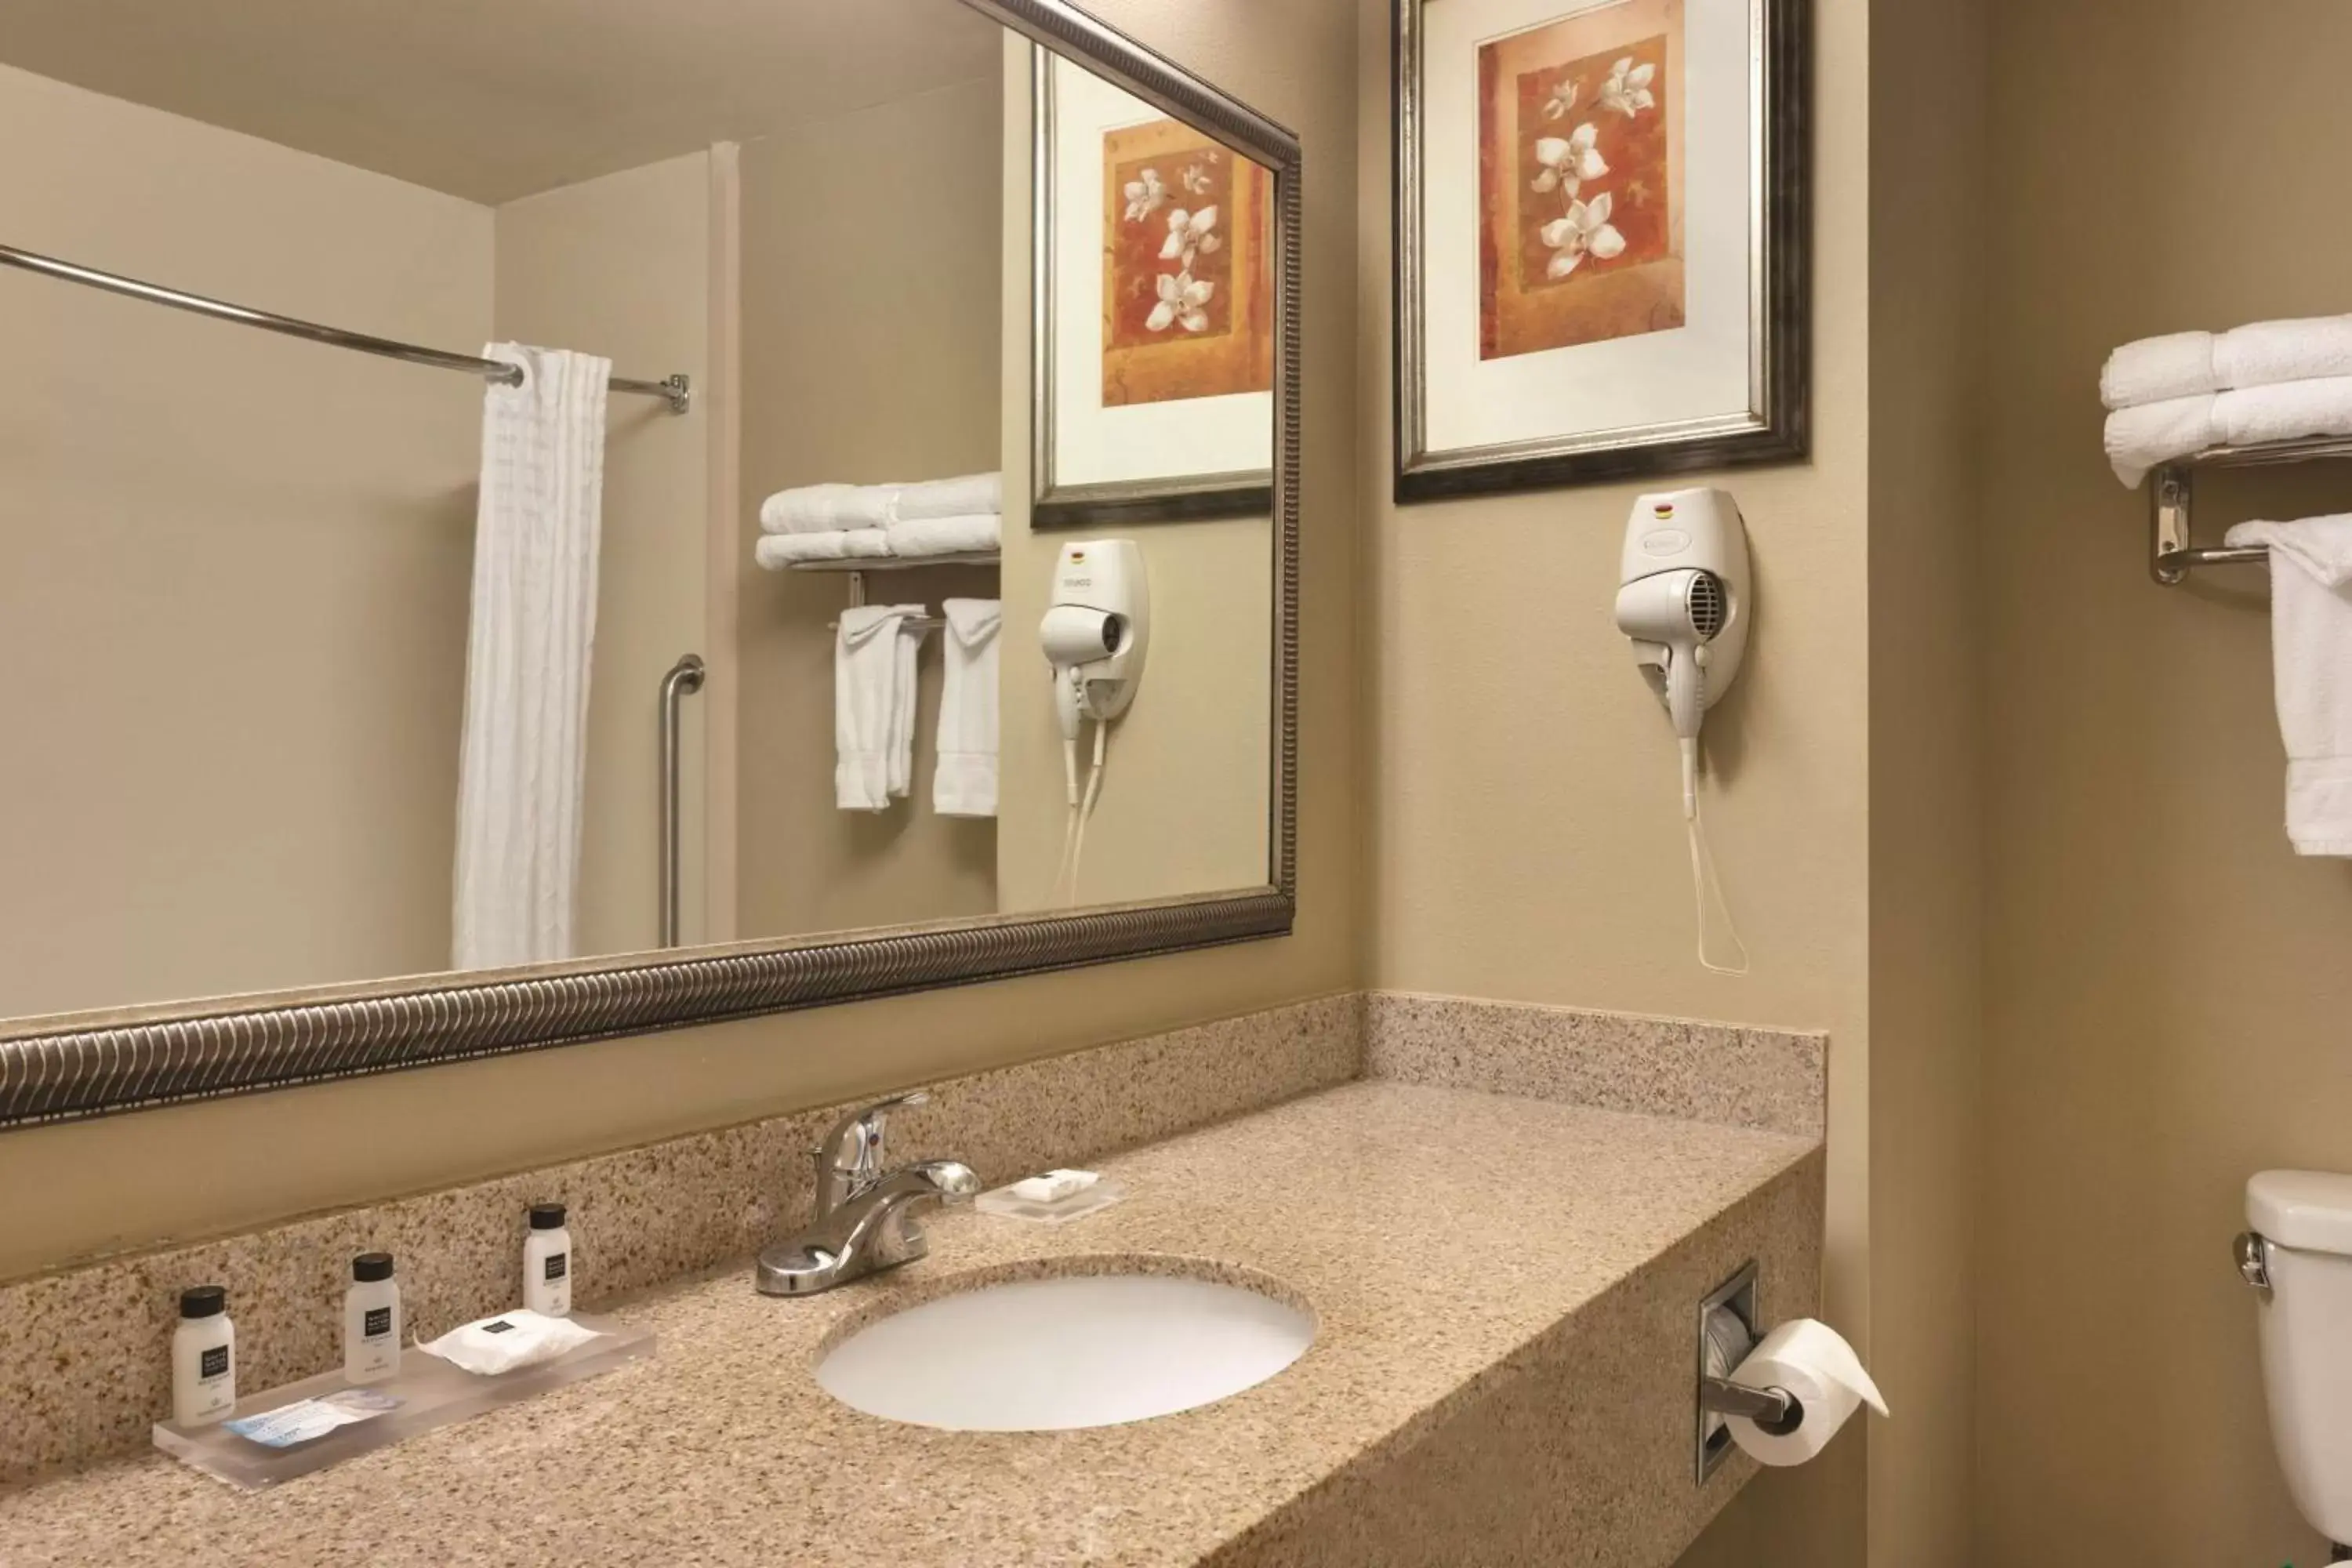 Bathroom in Country Inn & Suites by Radisson, Goodlettsville, TN